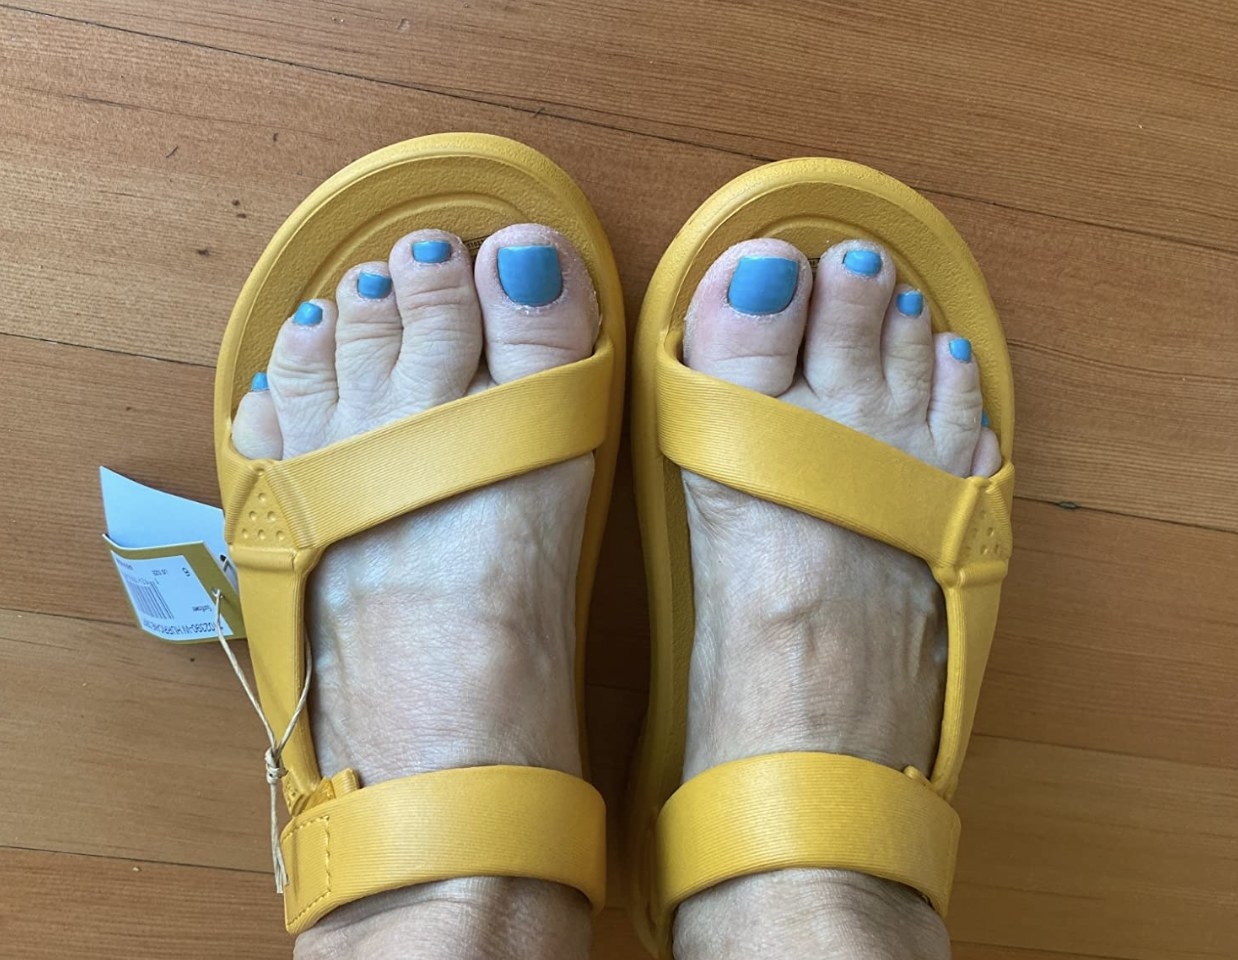 Someone with blue toenail polish wearing a pair or yellow Tevas sandals.